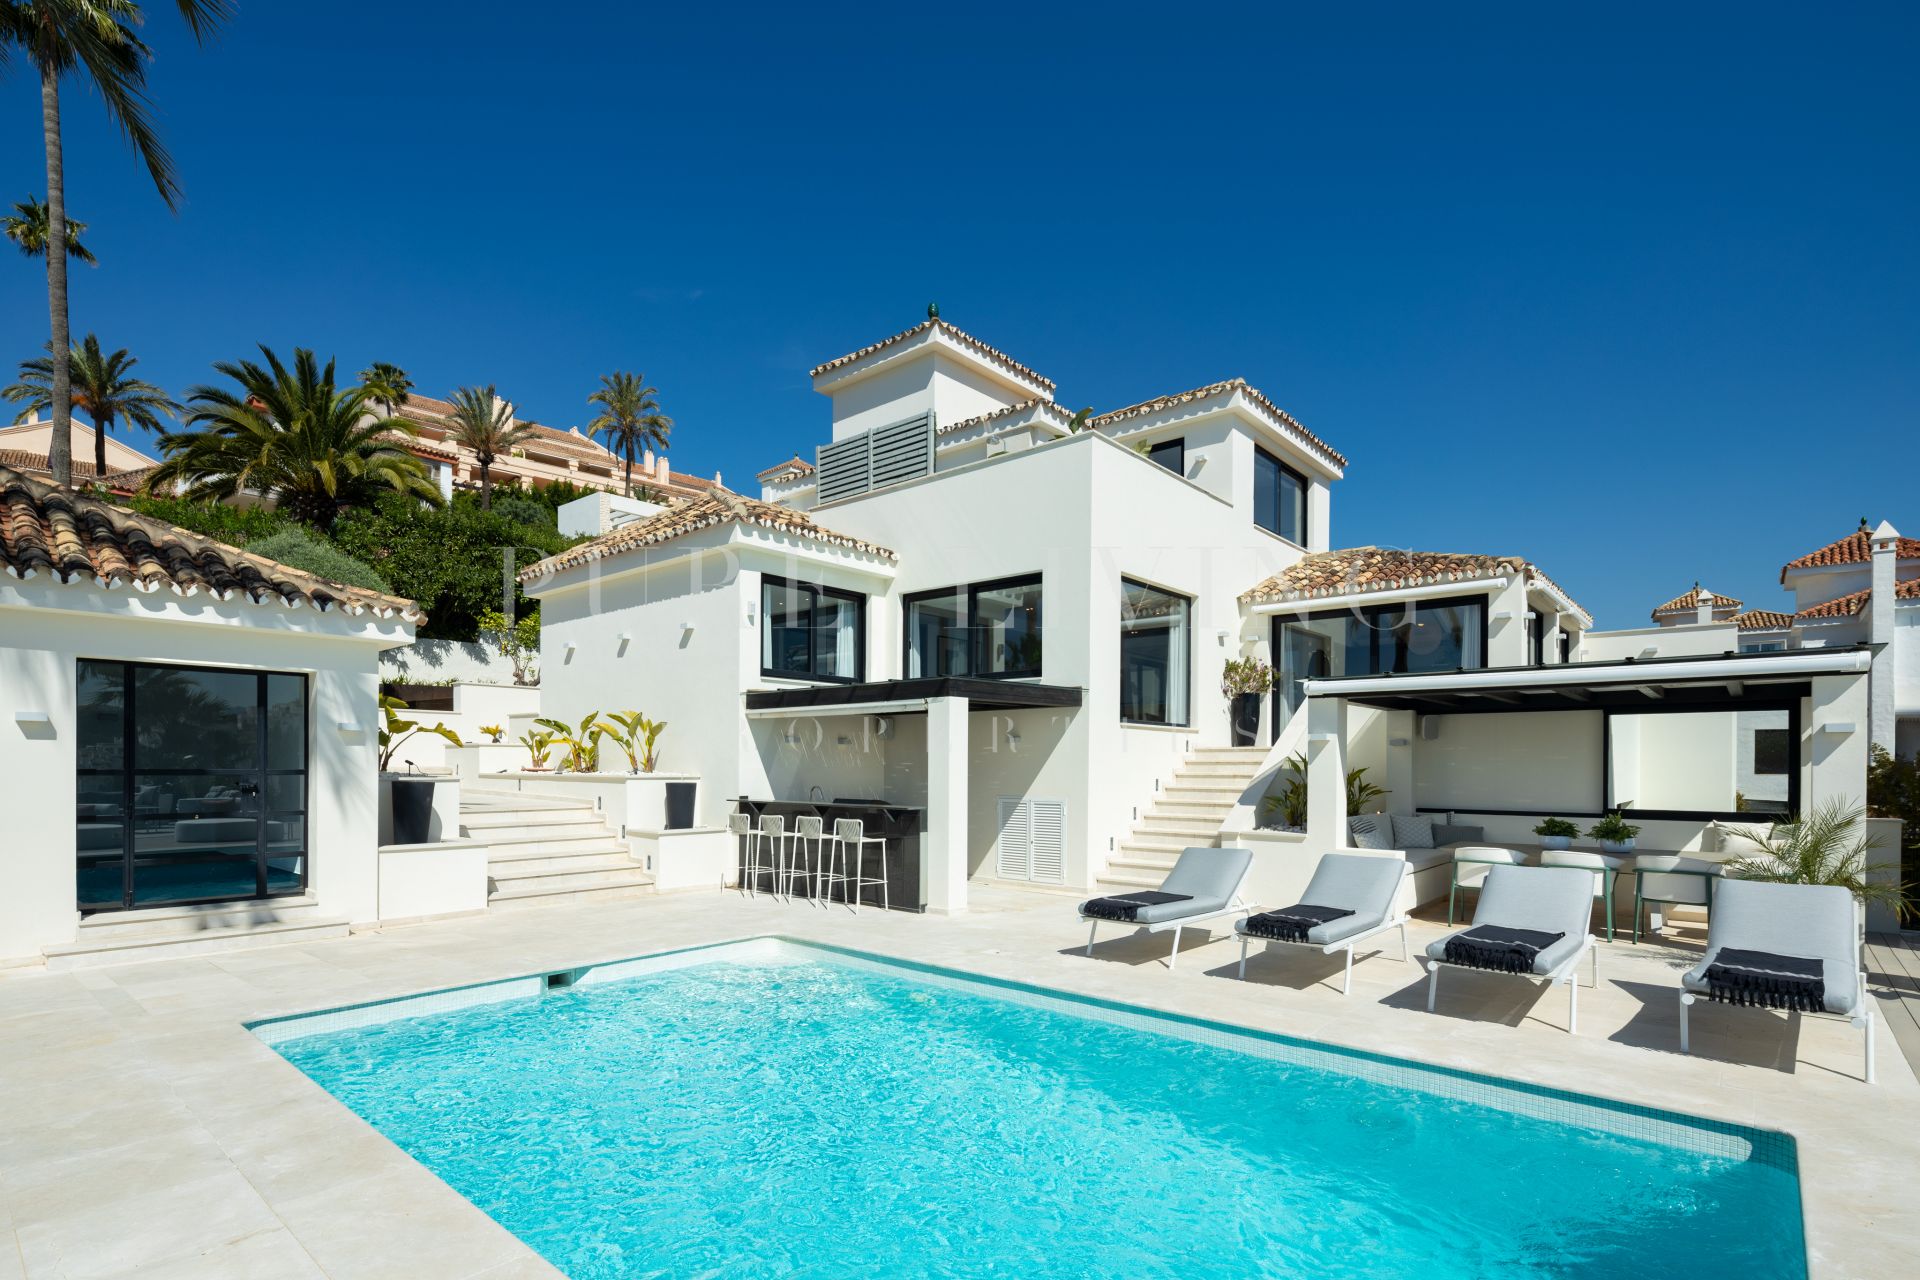 A stunning recently renovated villa located in the exclusive Los Naranjos Hill Club